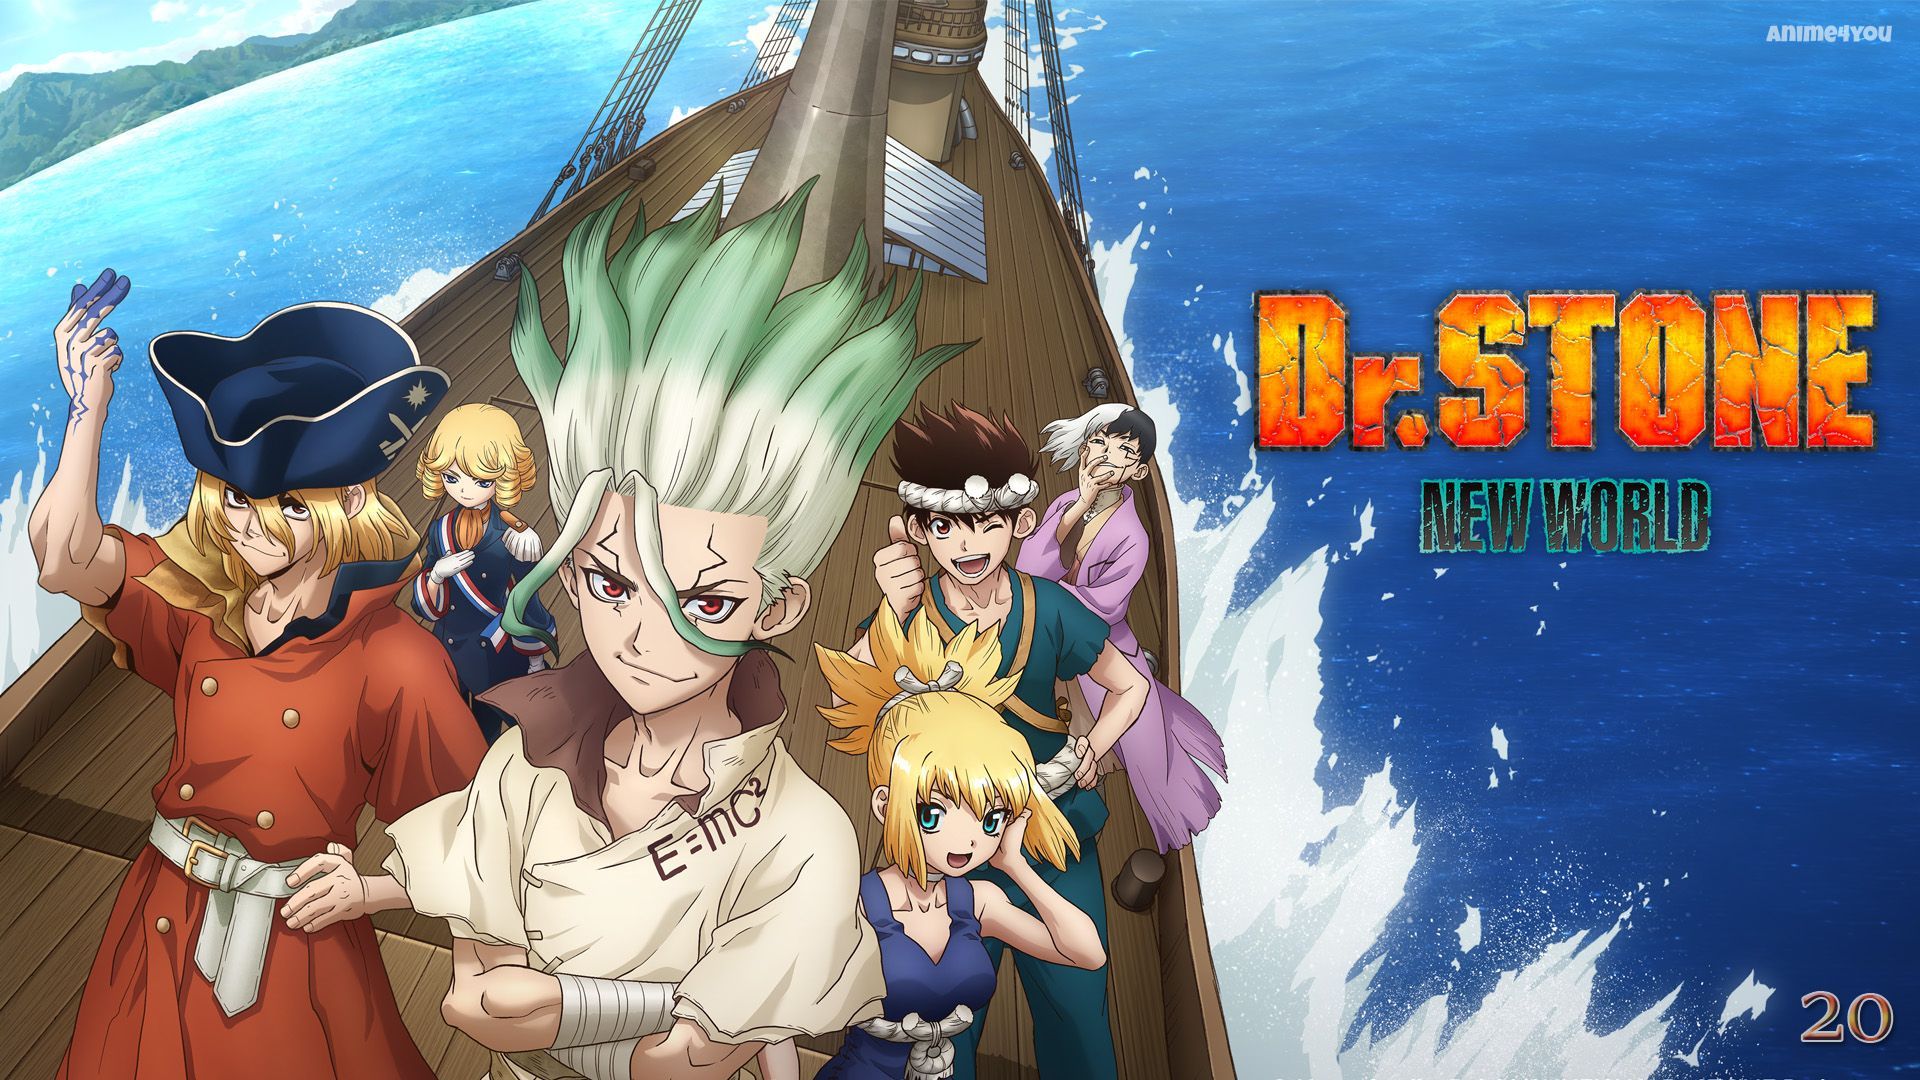 Dr. Stone Teases Season 3's New World in Visual!